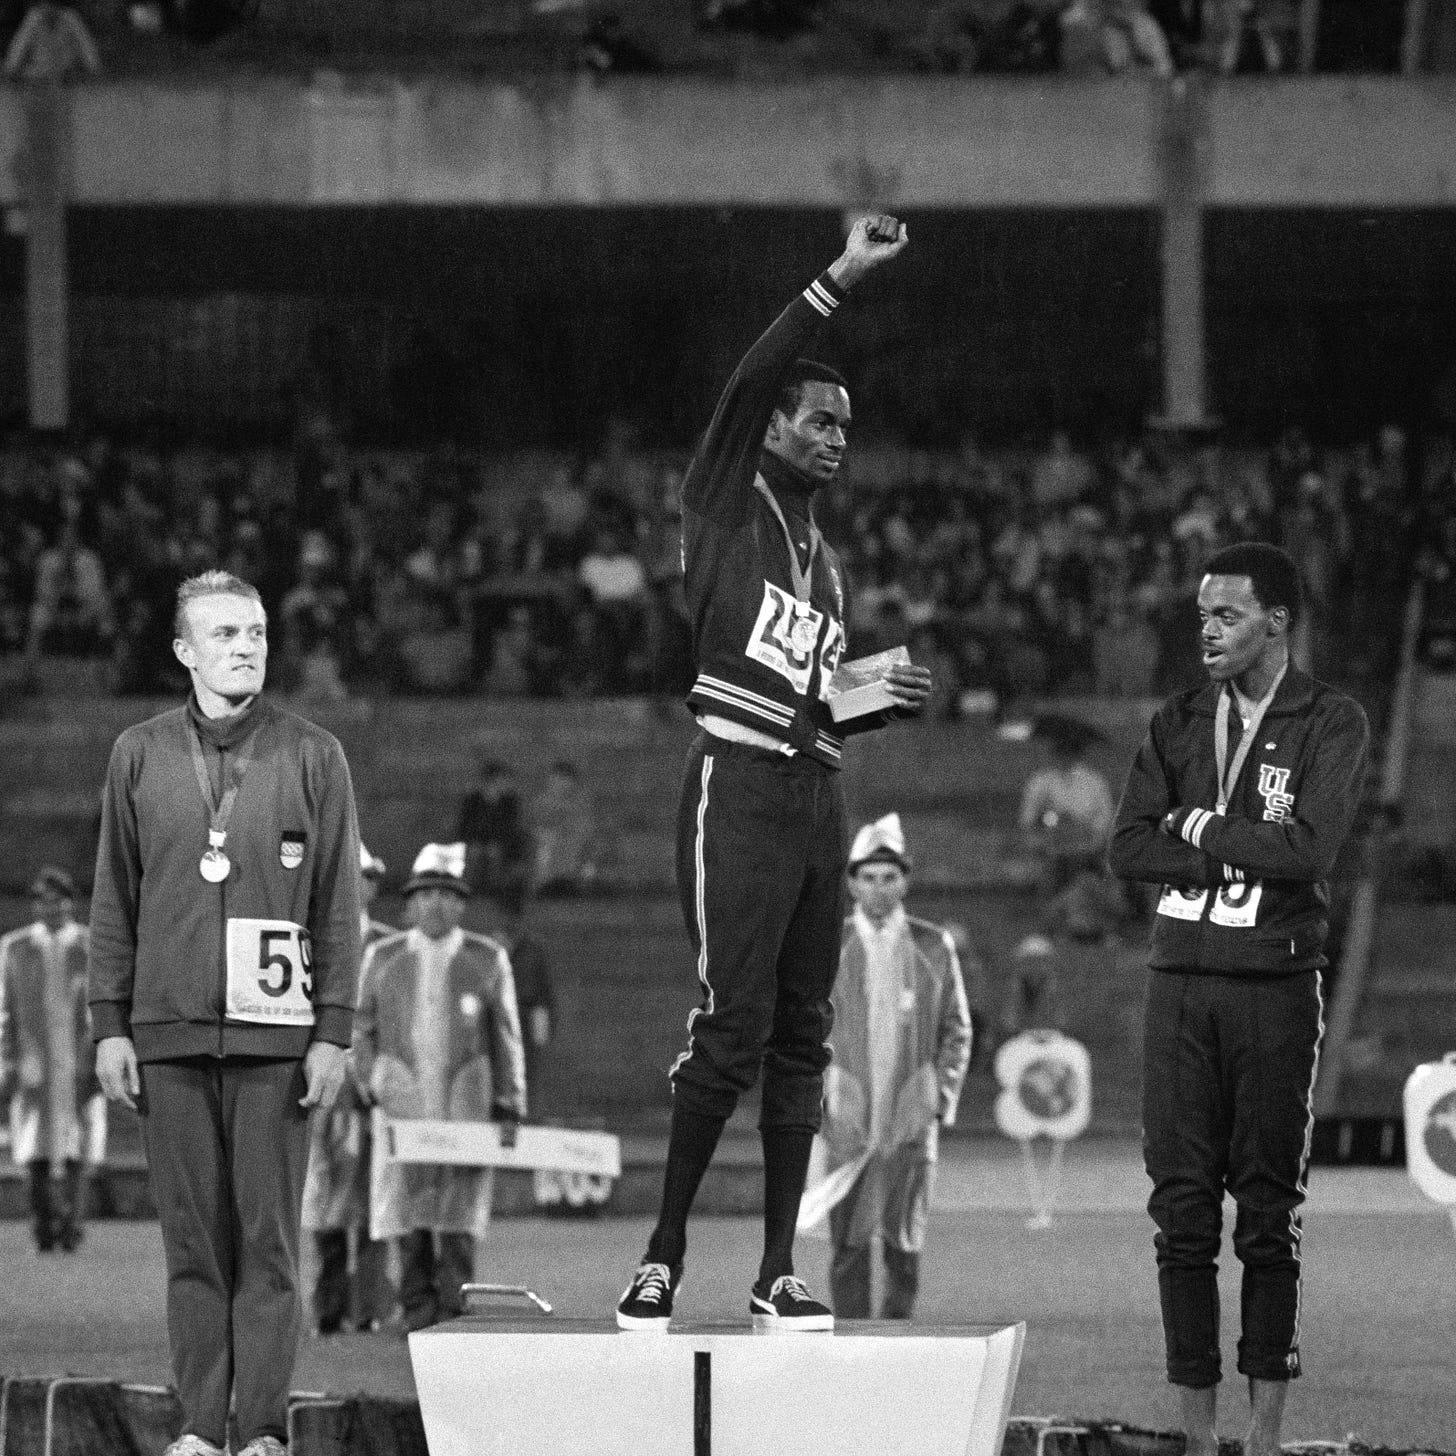 Months before his famous jump, Bob Beamon got kicked off his college track  team for protesting racism